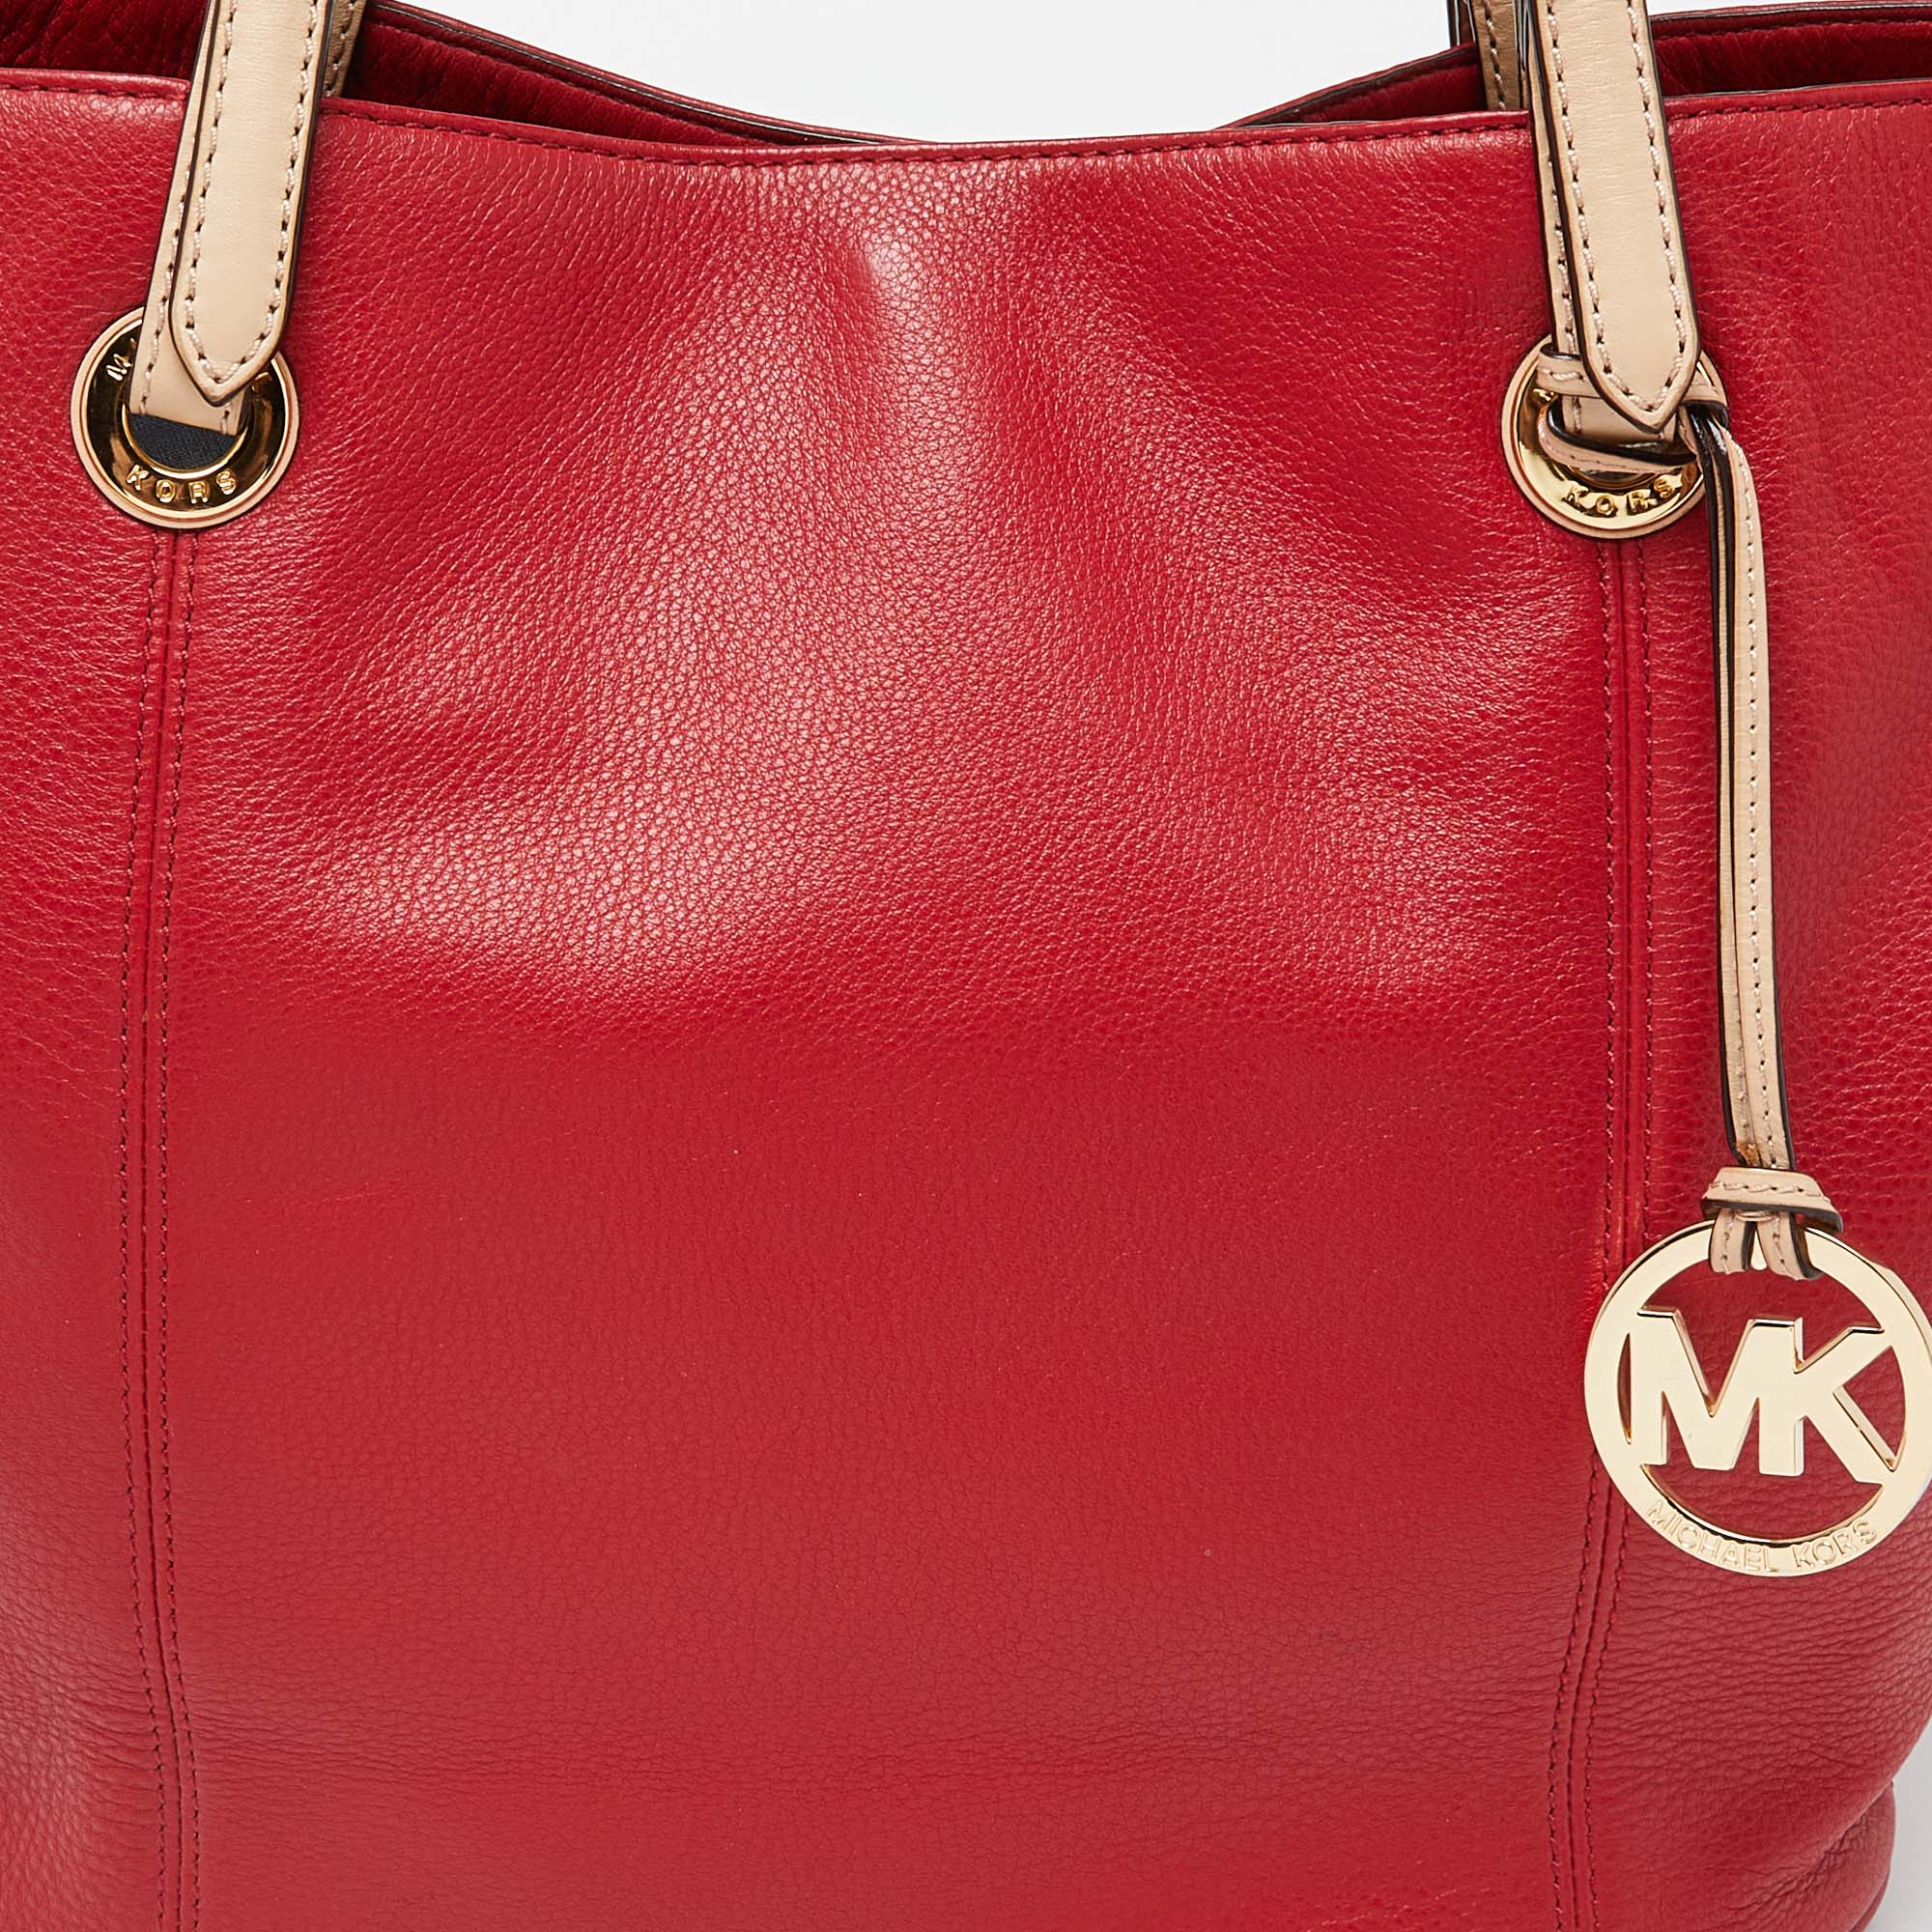 MICHAEL Michael Kors Red Leather Jet Set Tote